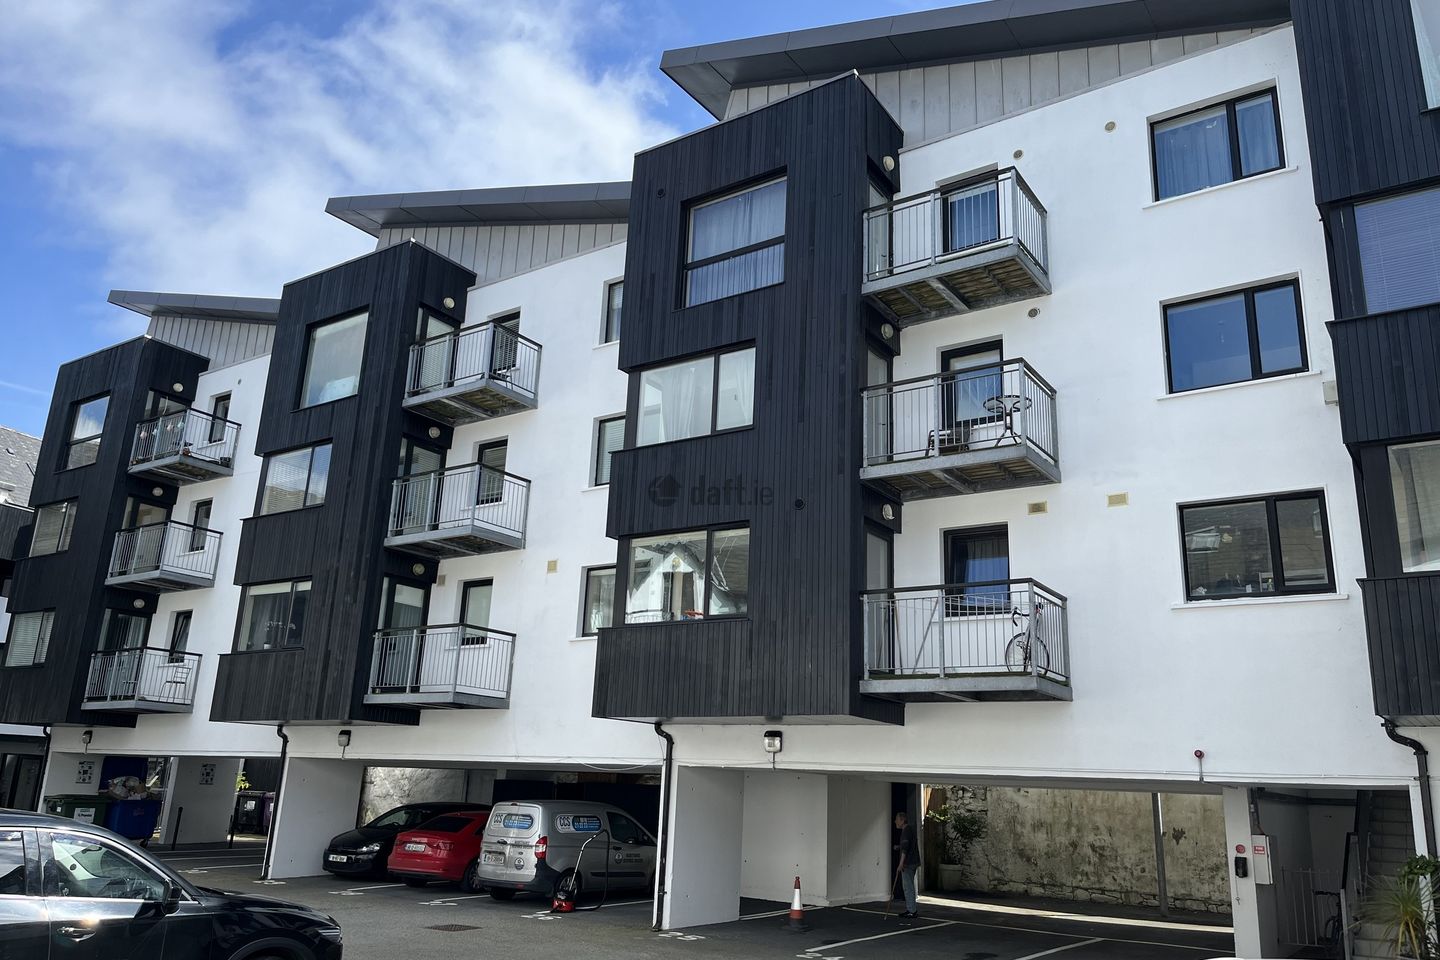 Apartment 35, The Maltings, Wexford Town, Co. Wexford